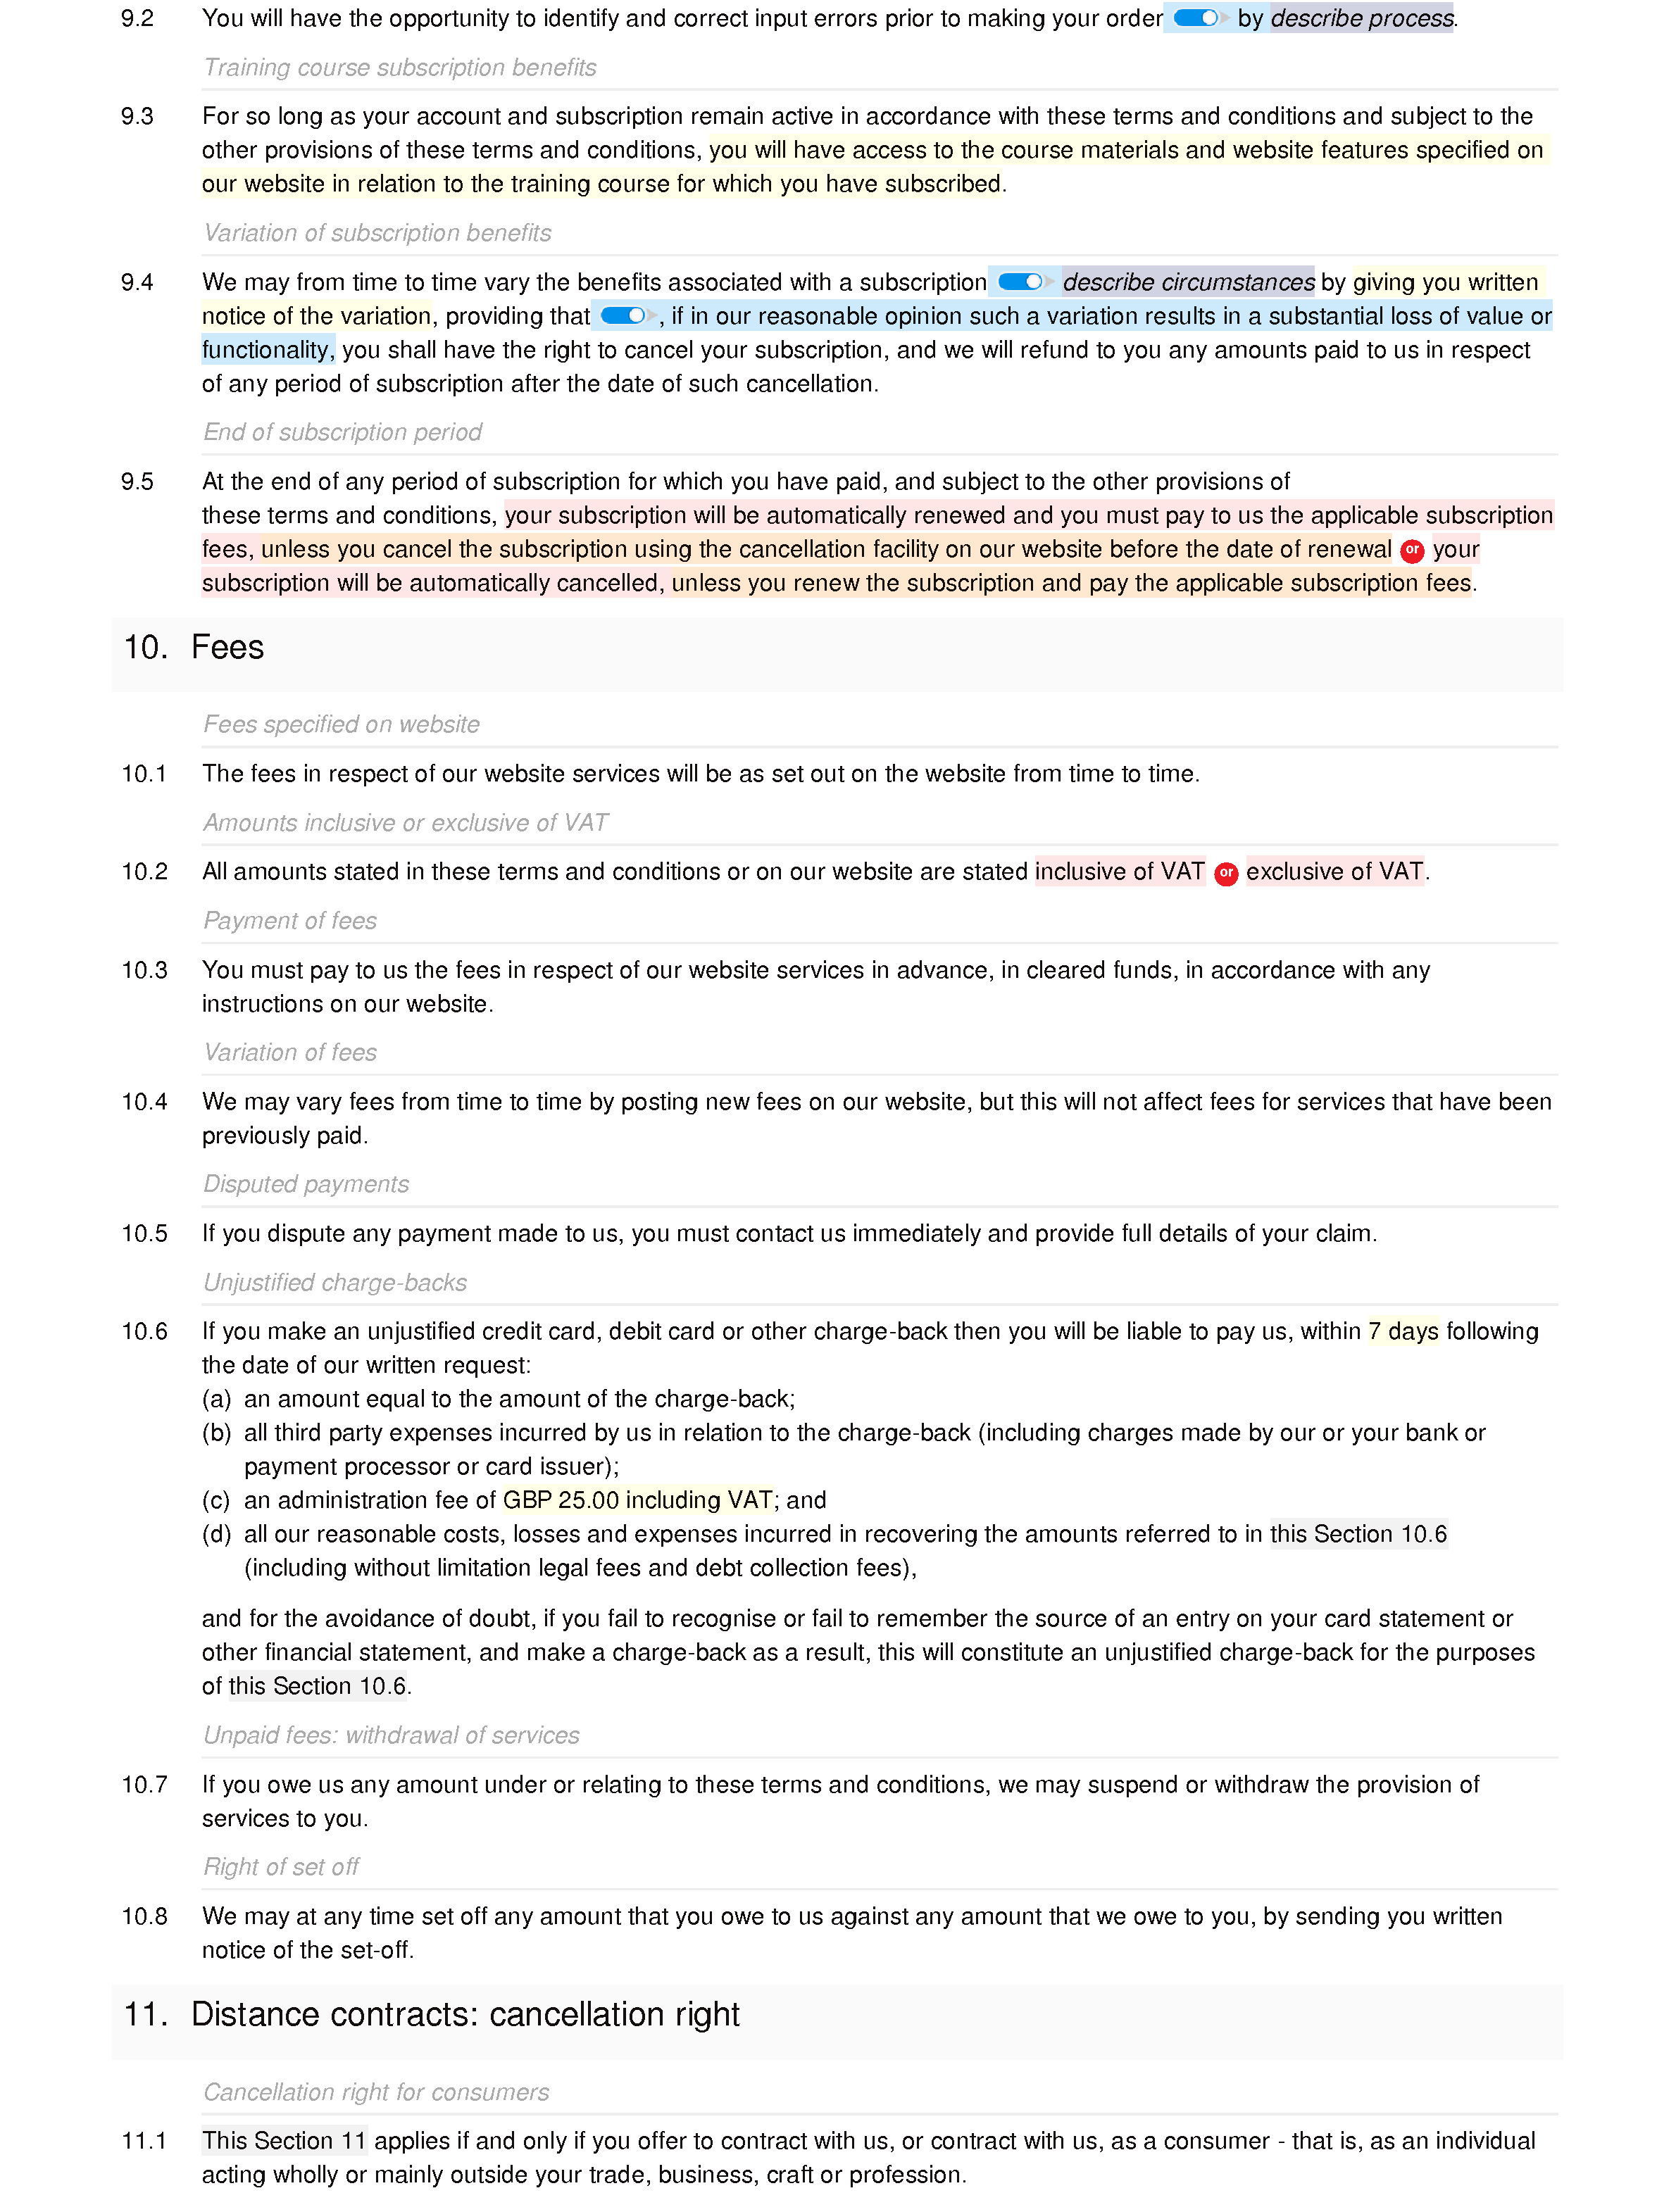 Medical training website terms and conditions document editor preview